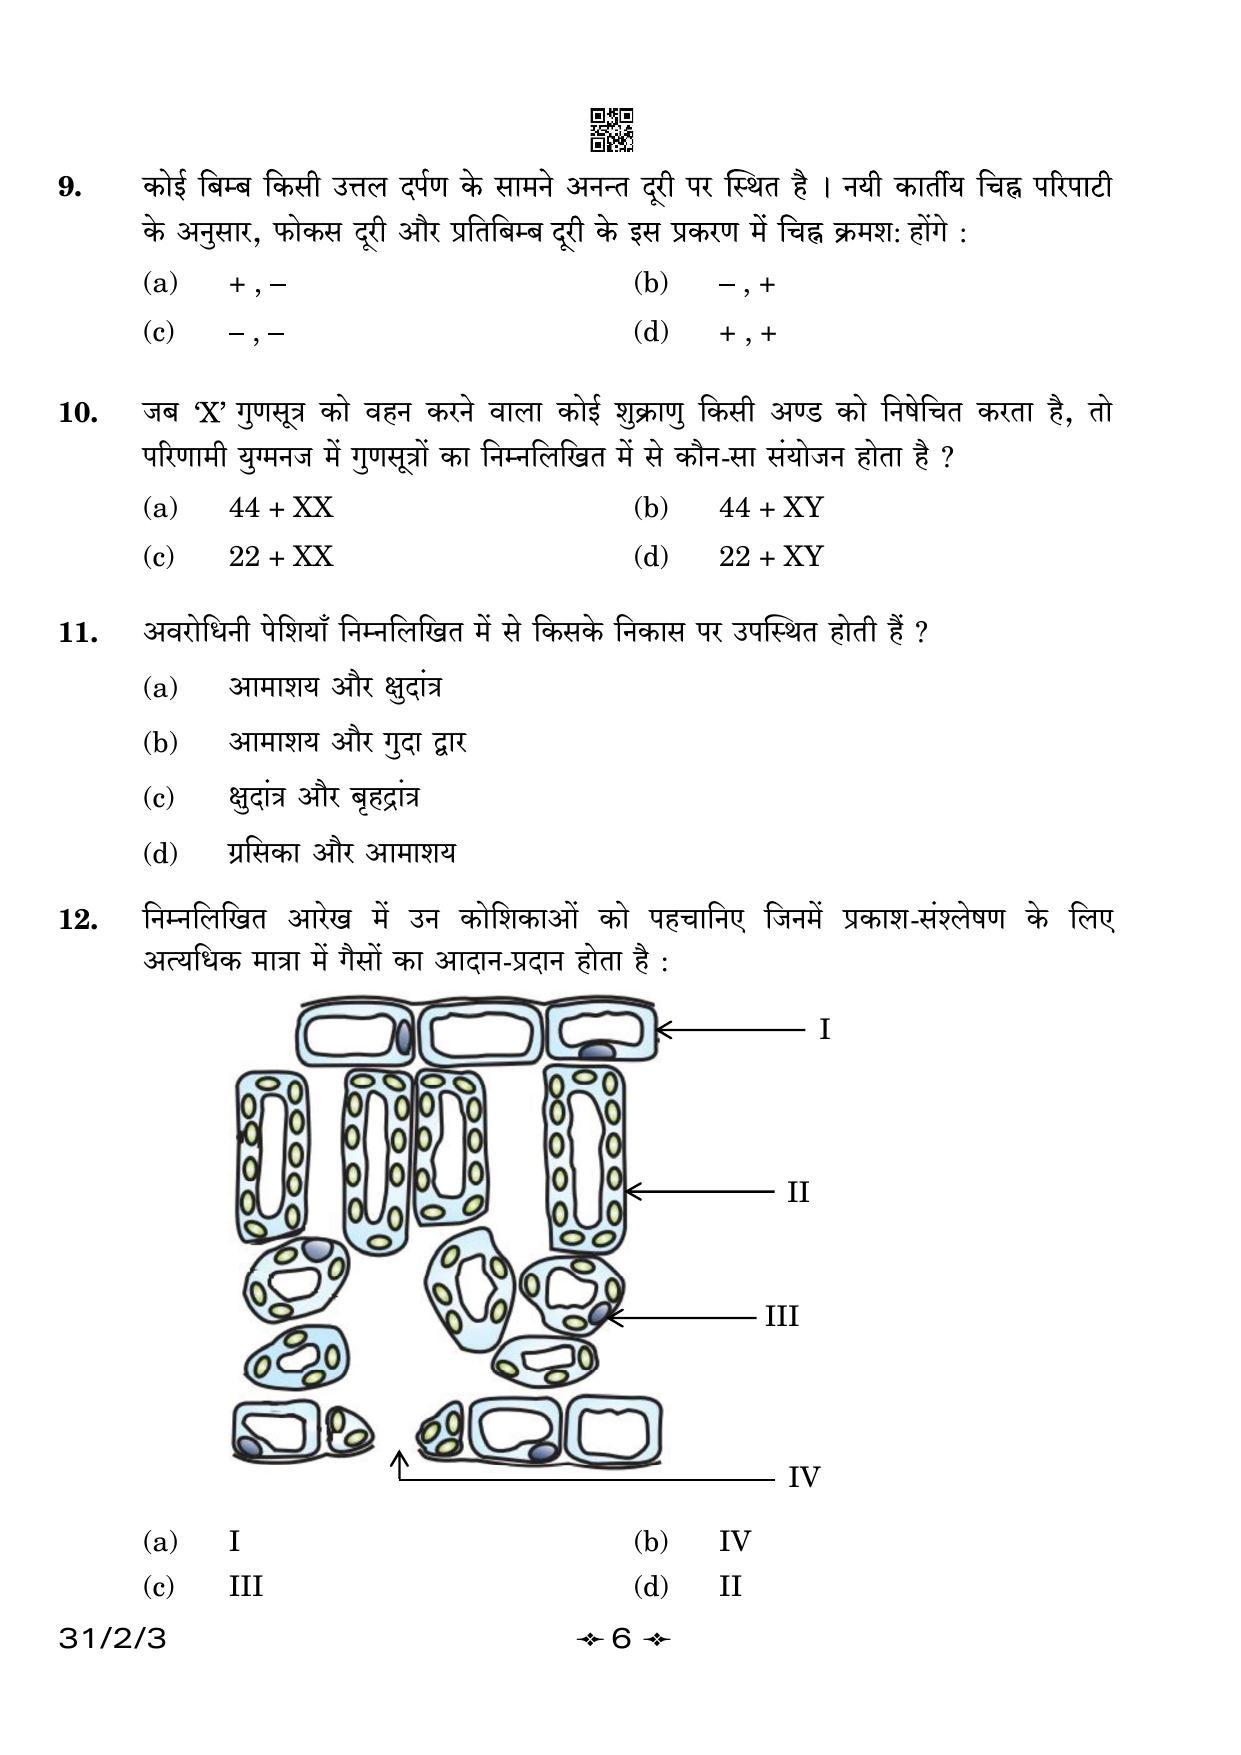 CBSE Class 10 31-2-3 Science 2023 Question Paper - Page 6